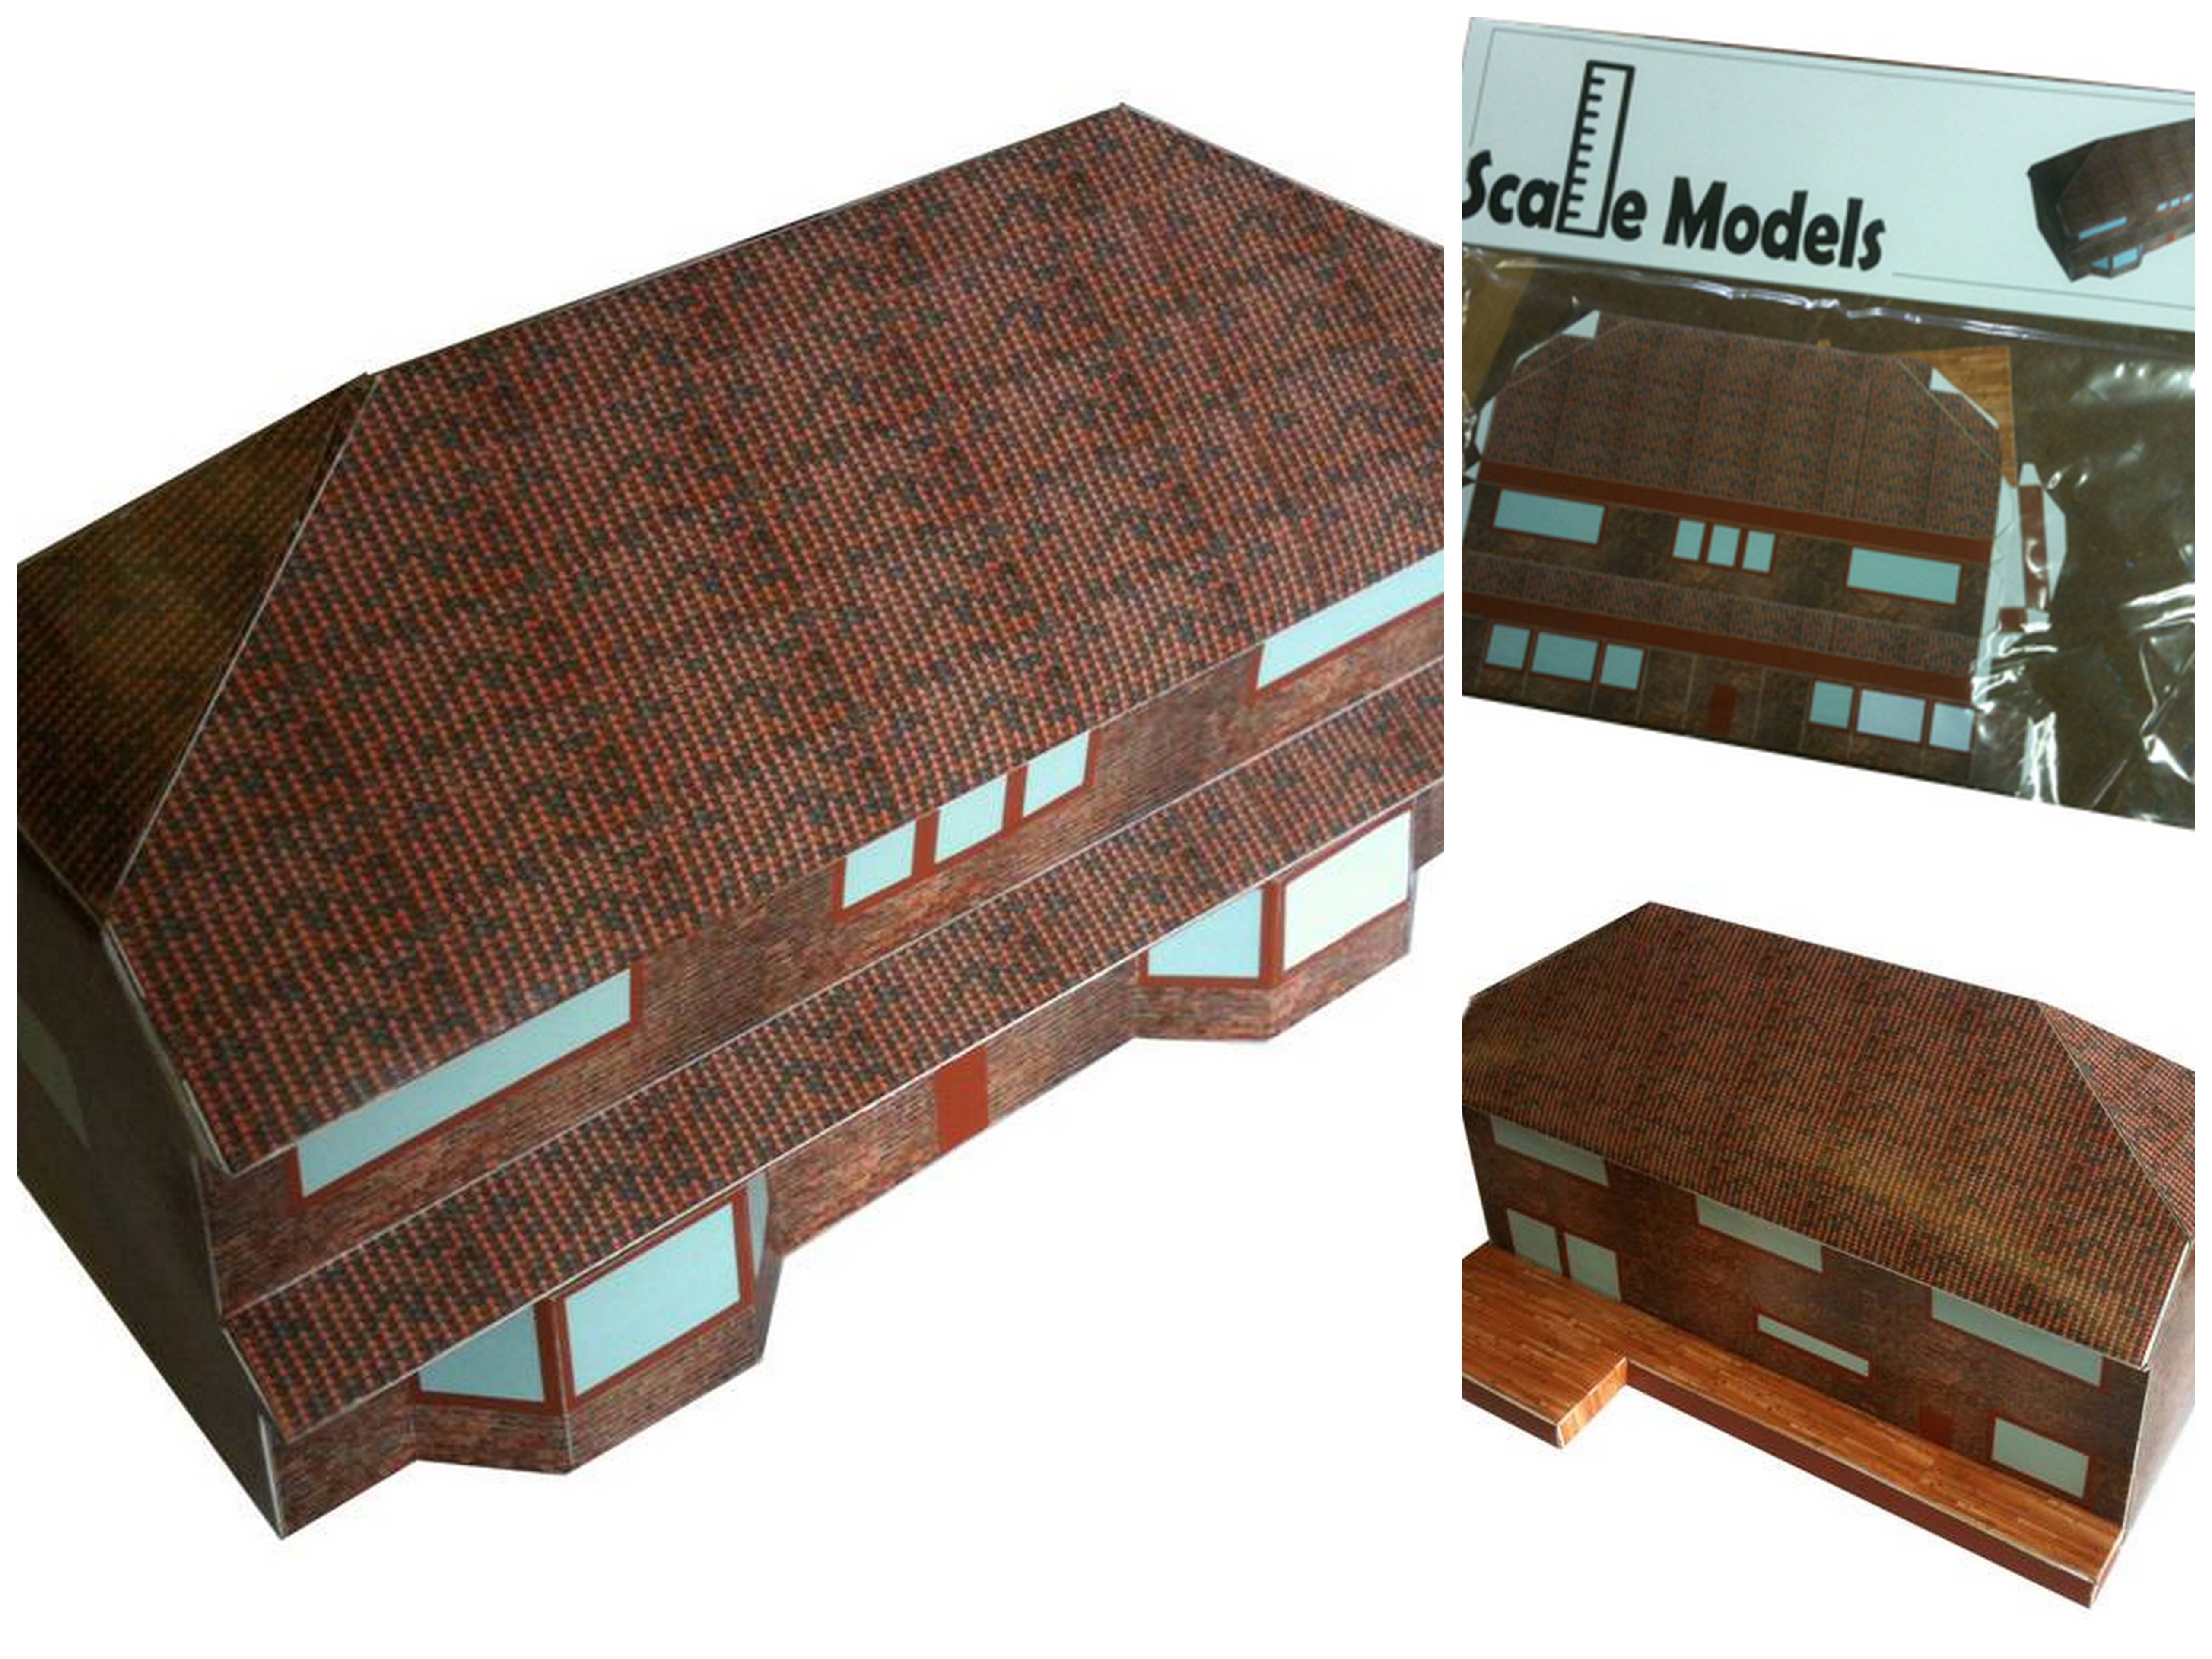 Pictures of my GCSE Graphic Product Scale House Model Kit